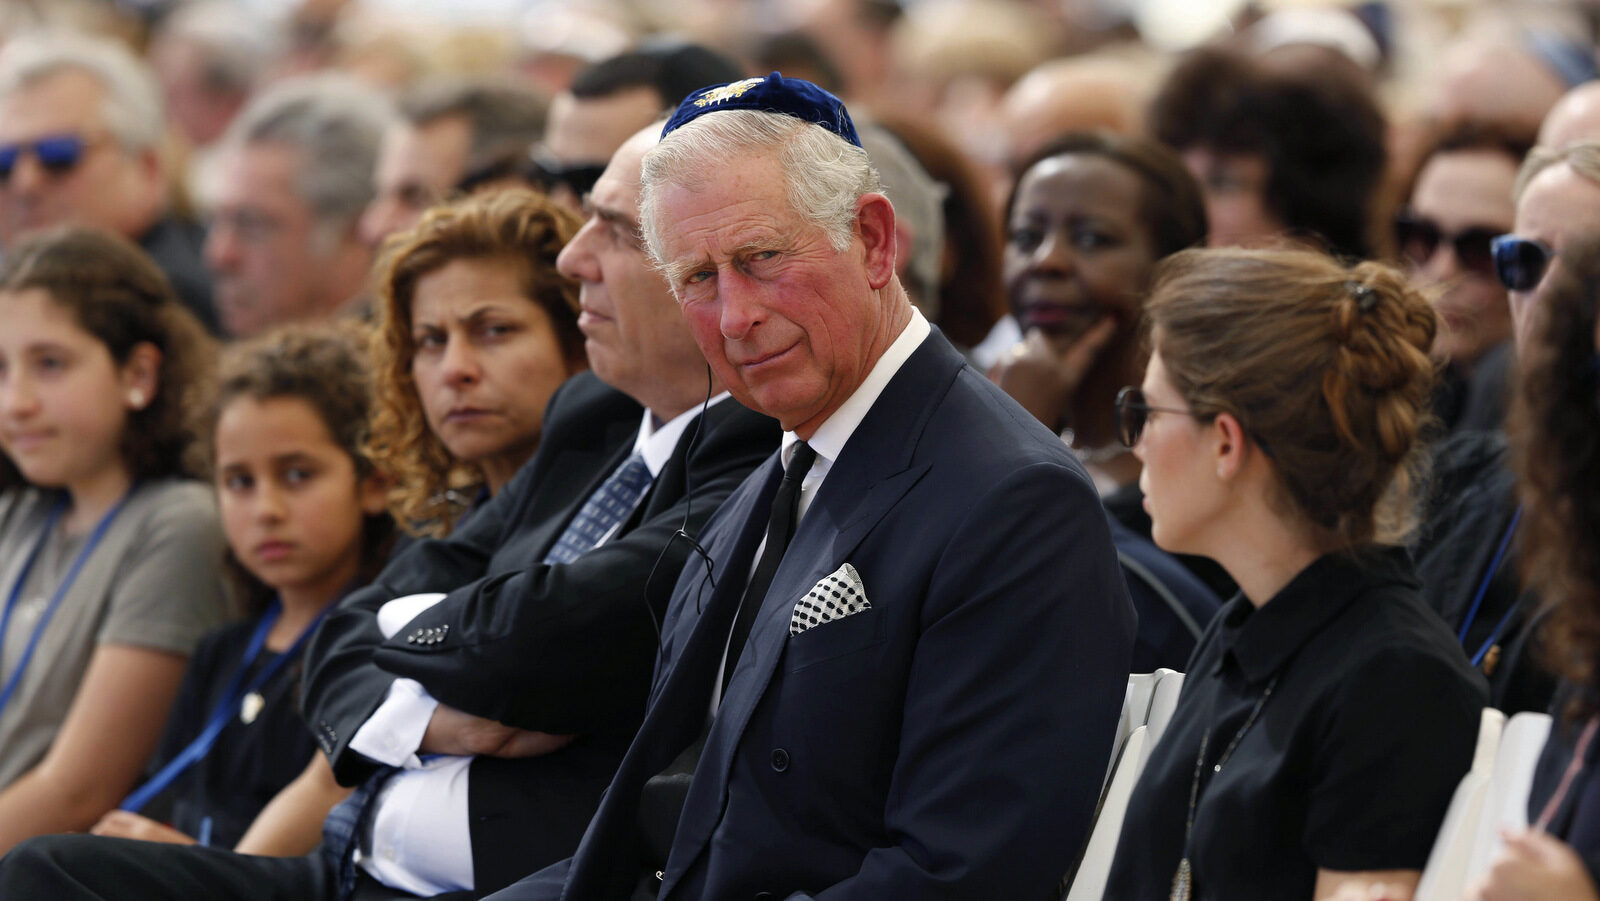 Britain's Prince Charles attends the funeral ceremony for former Israeli President Shimon Peres in Jerusalem, Sept. 30, 2016. (Abir Sultan/AP)